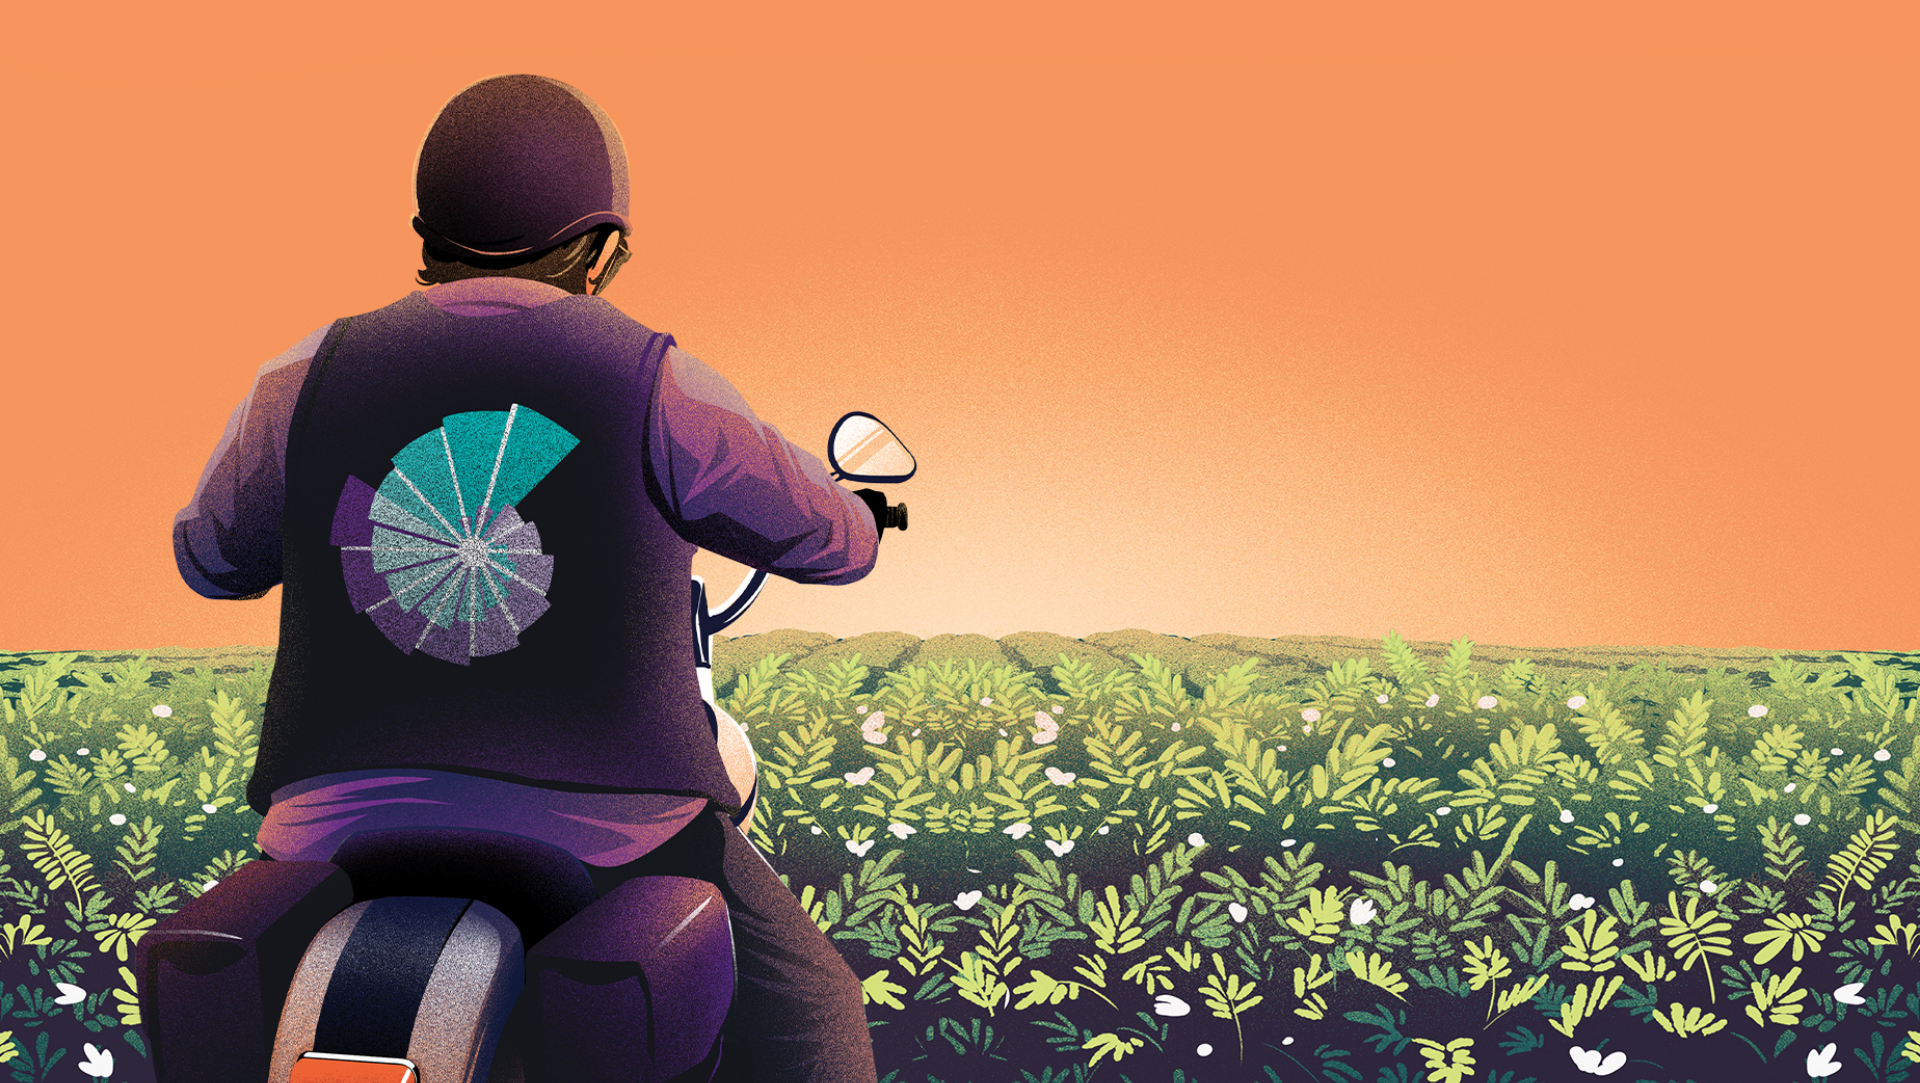 A graphic illustration created for Syngenta